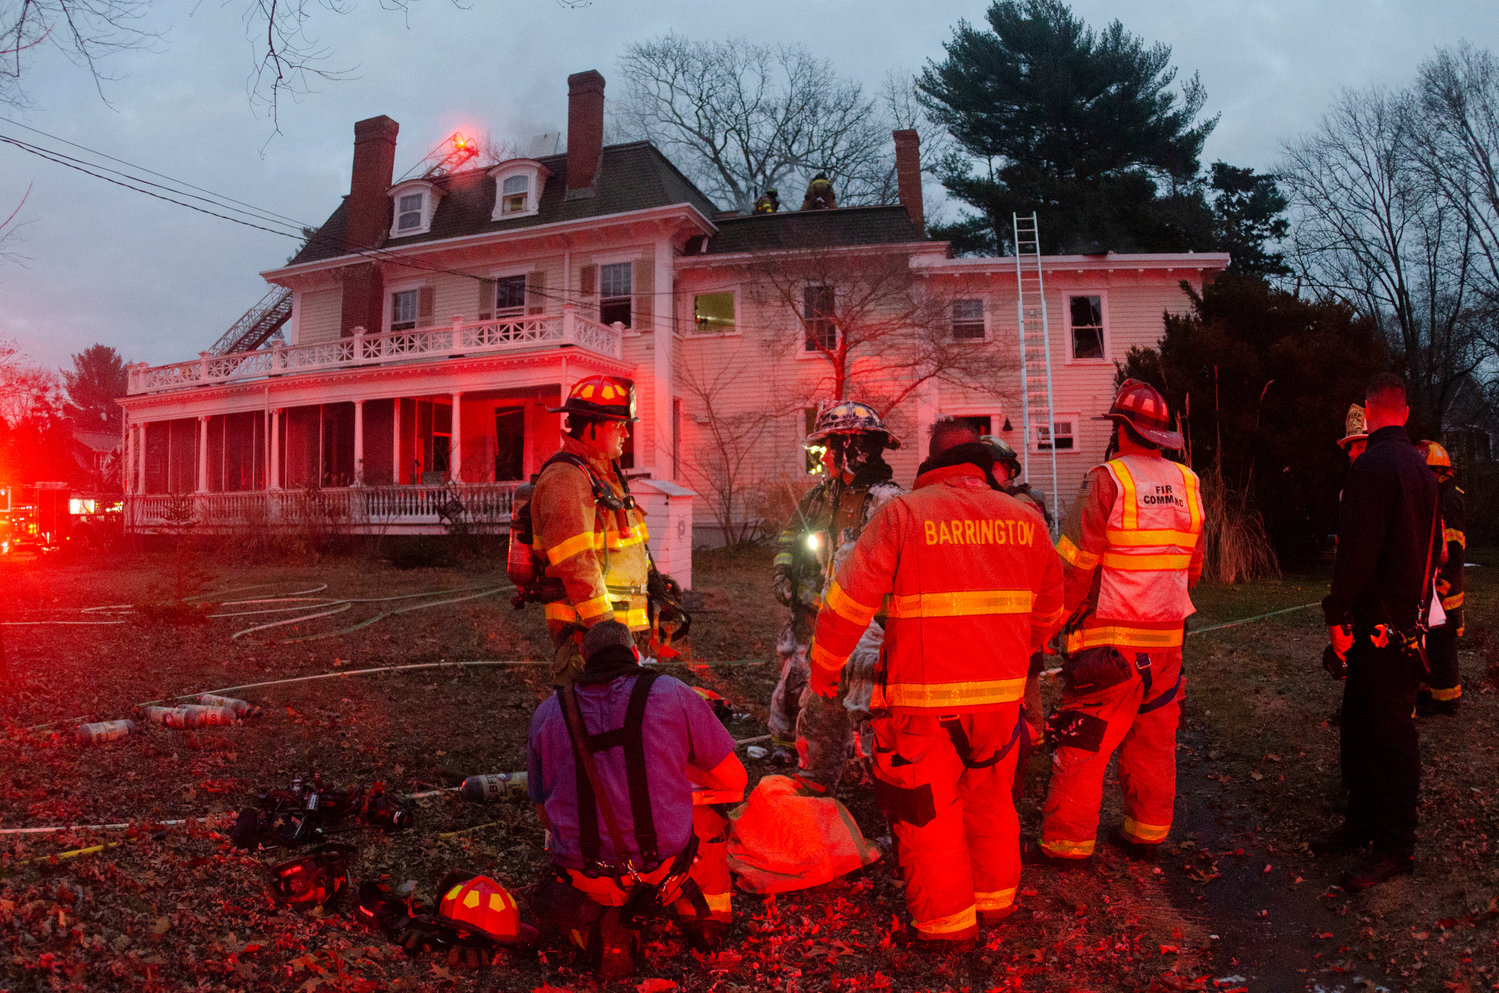 Firefighters battle a blaze at a large historic home in Barrington late Saturday afternoon.